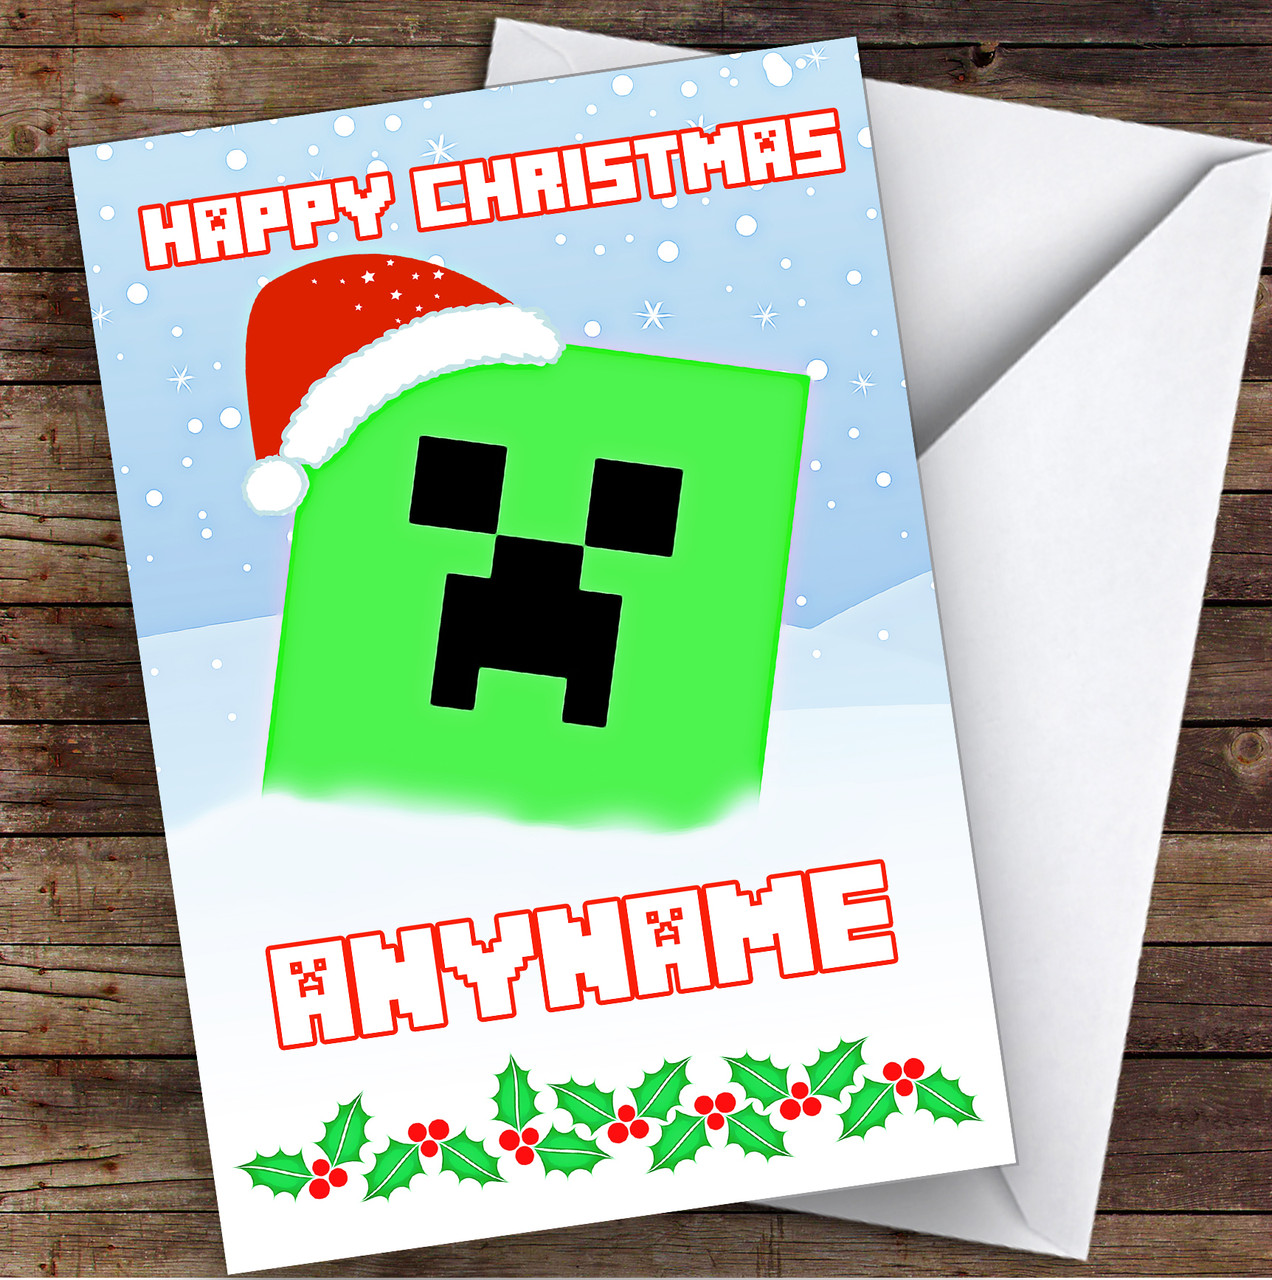 I Love Doing All Things Crafty: 3D Paper Minecraft Creeper Treat